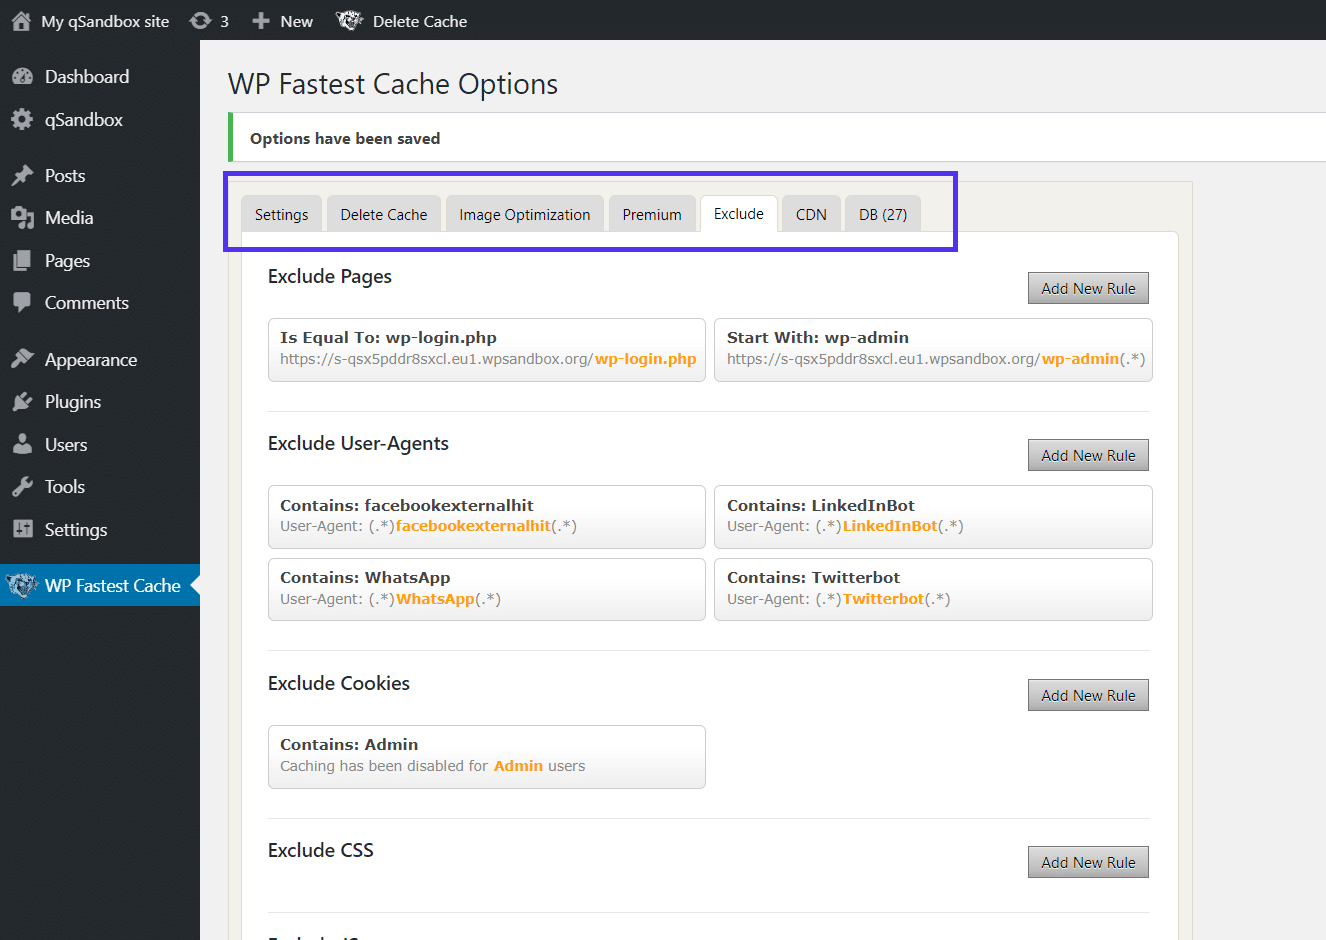 The 'Exclude' tab in WP Fastest Cache Options